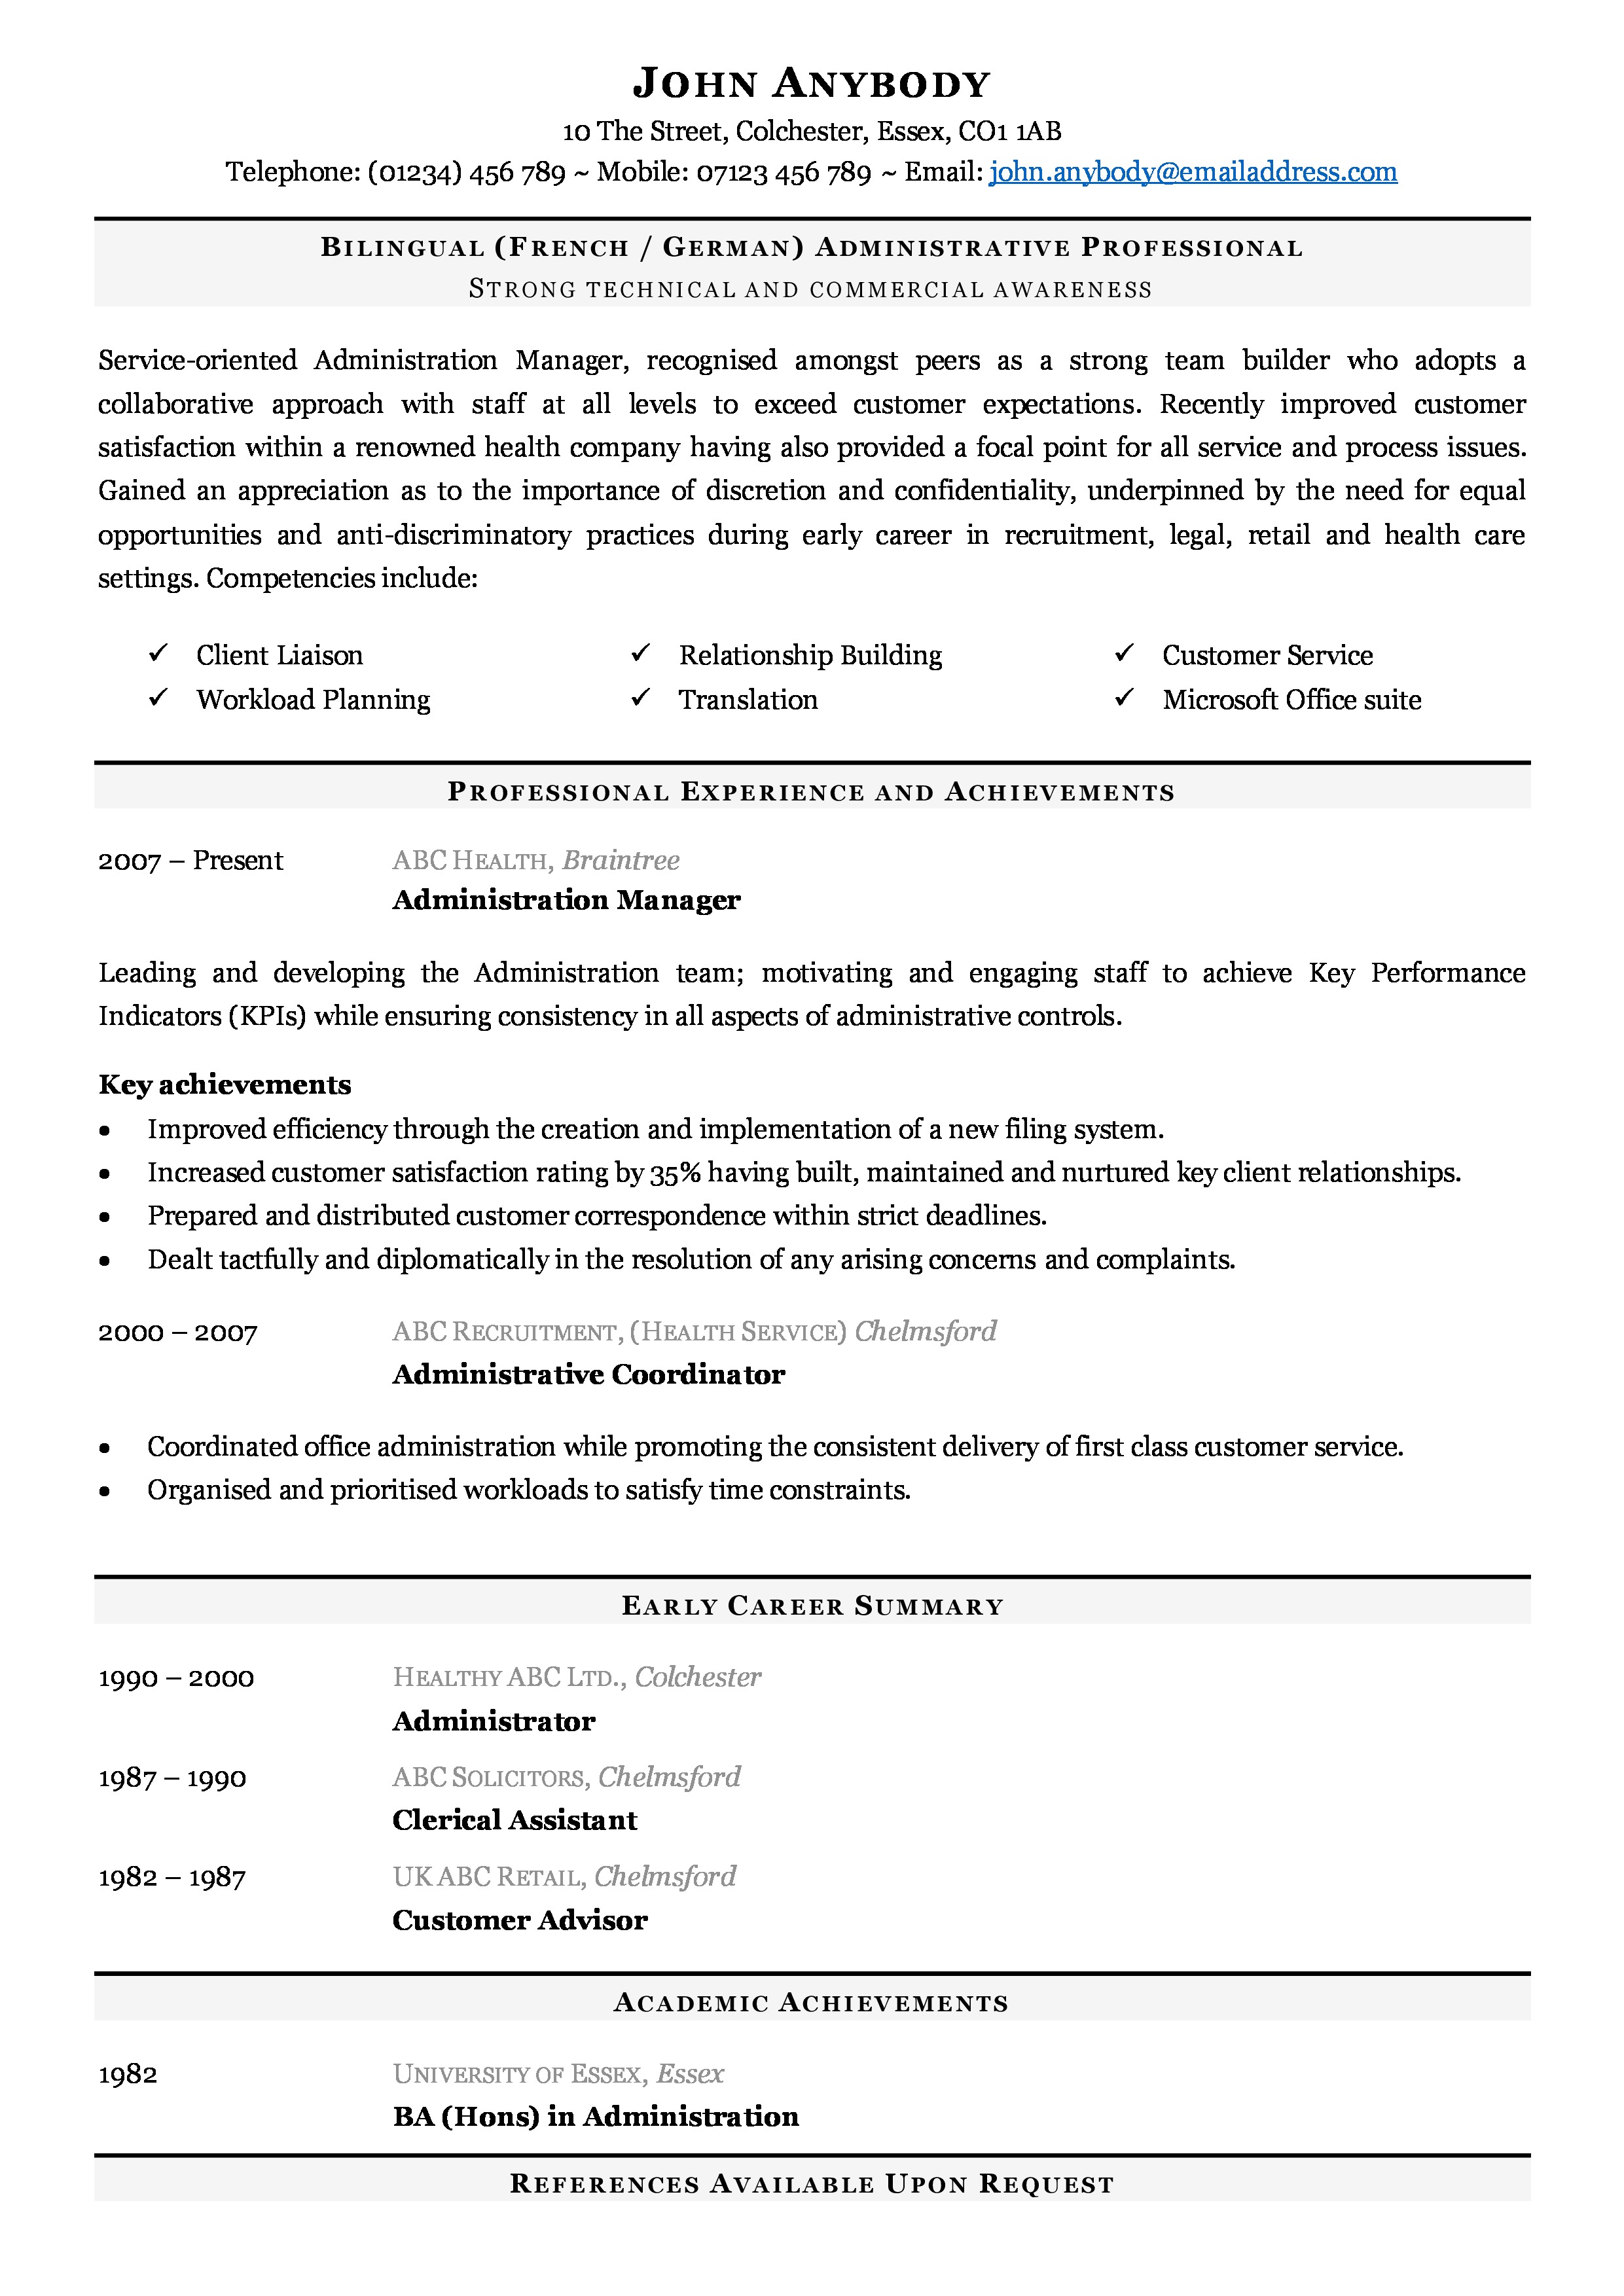 writing resume in 3rd person